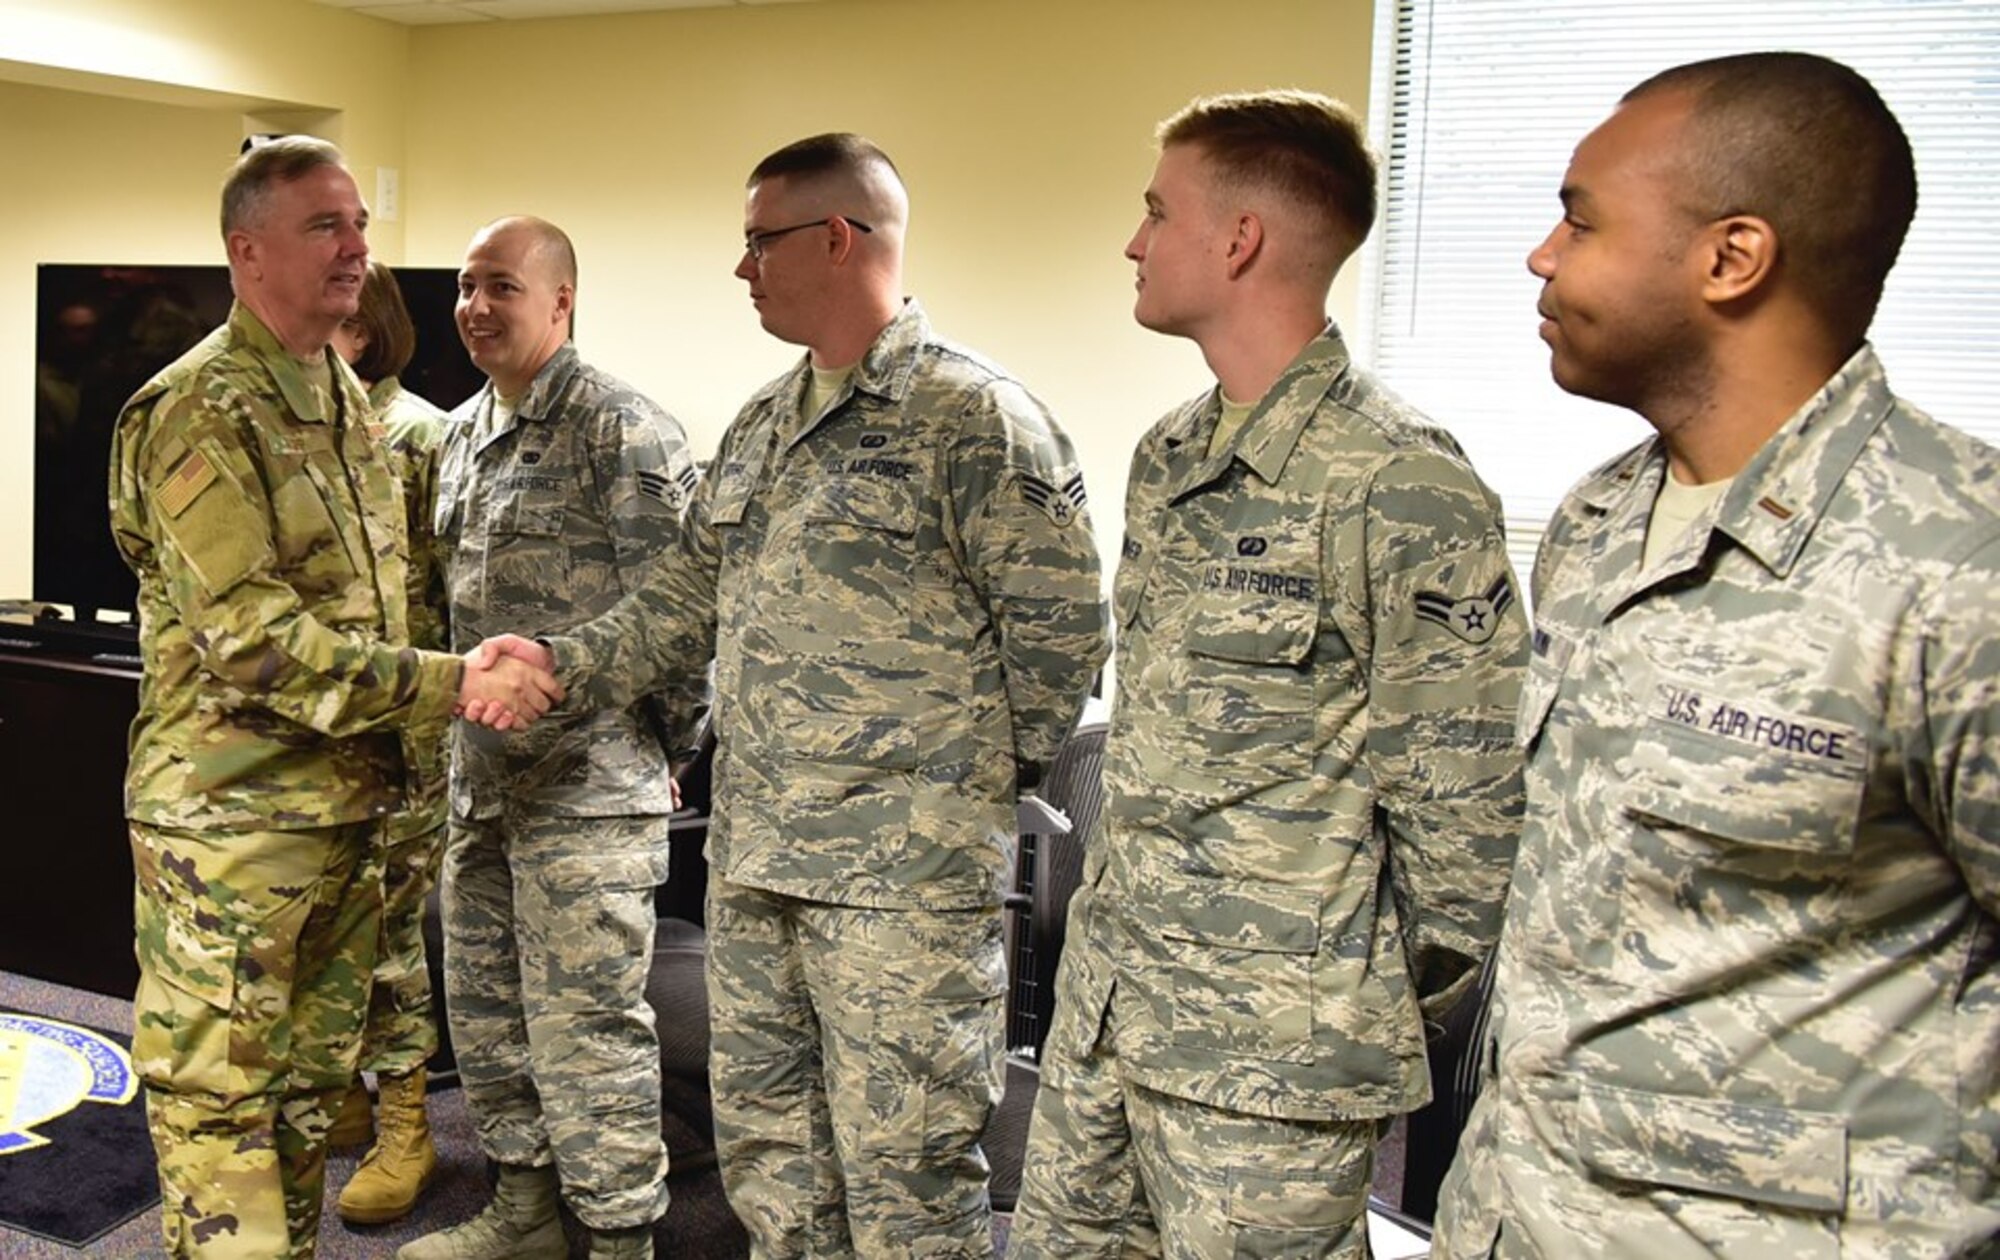 Air Force District of Washington Commander Maj. Gen. Ricky N. Rupp meets with Airmen from the 11th Wing during his immersion visit here Aug. 20.